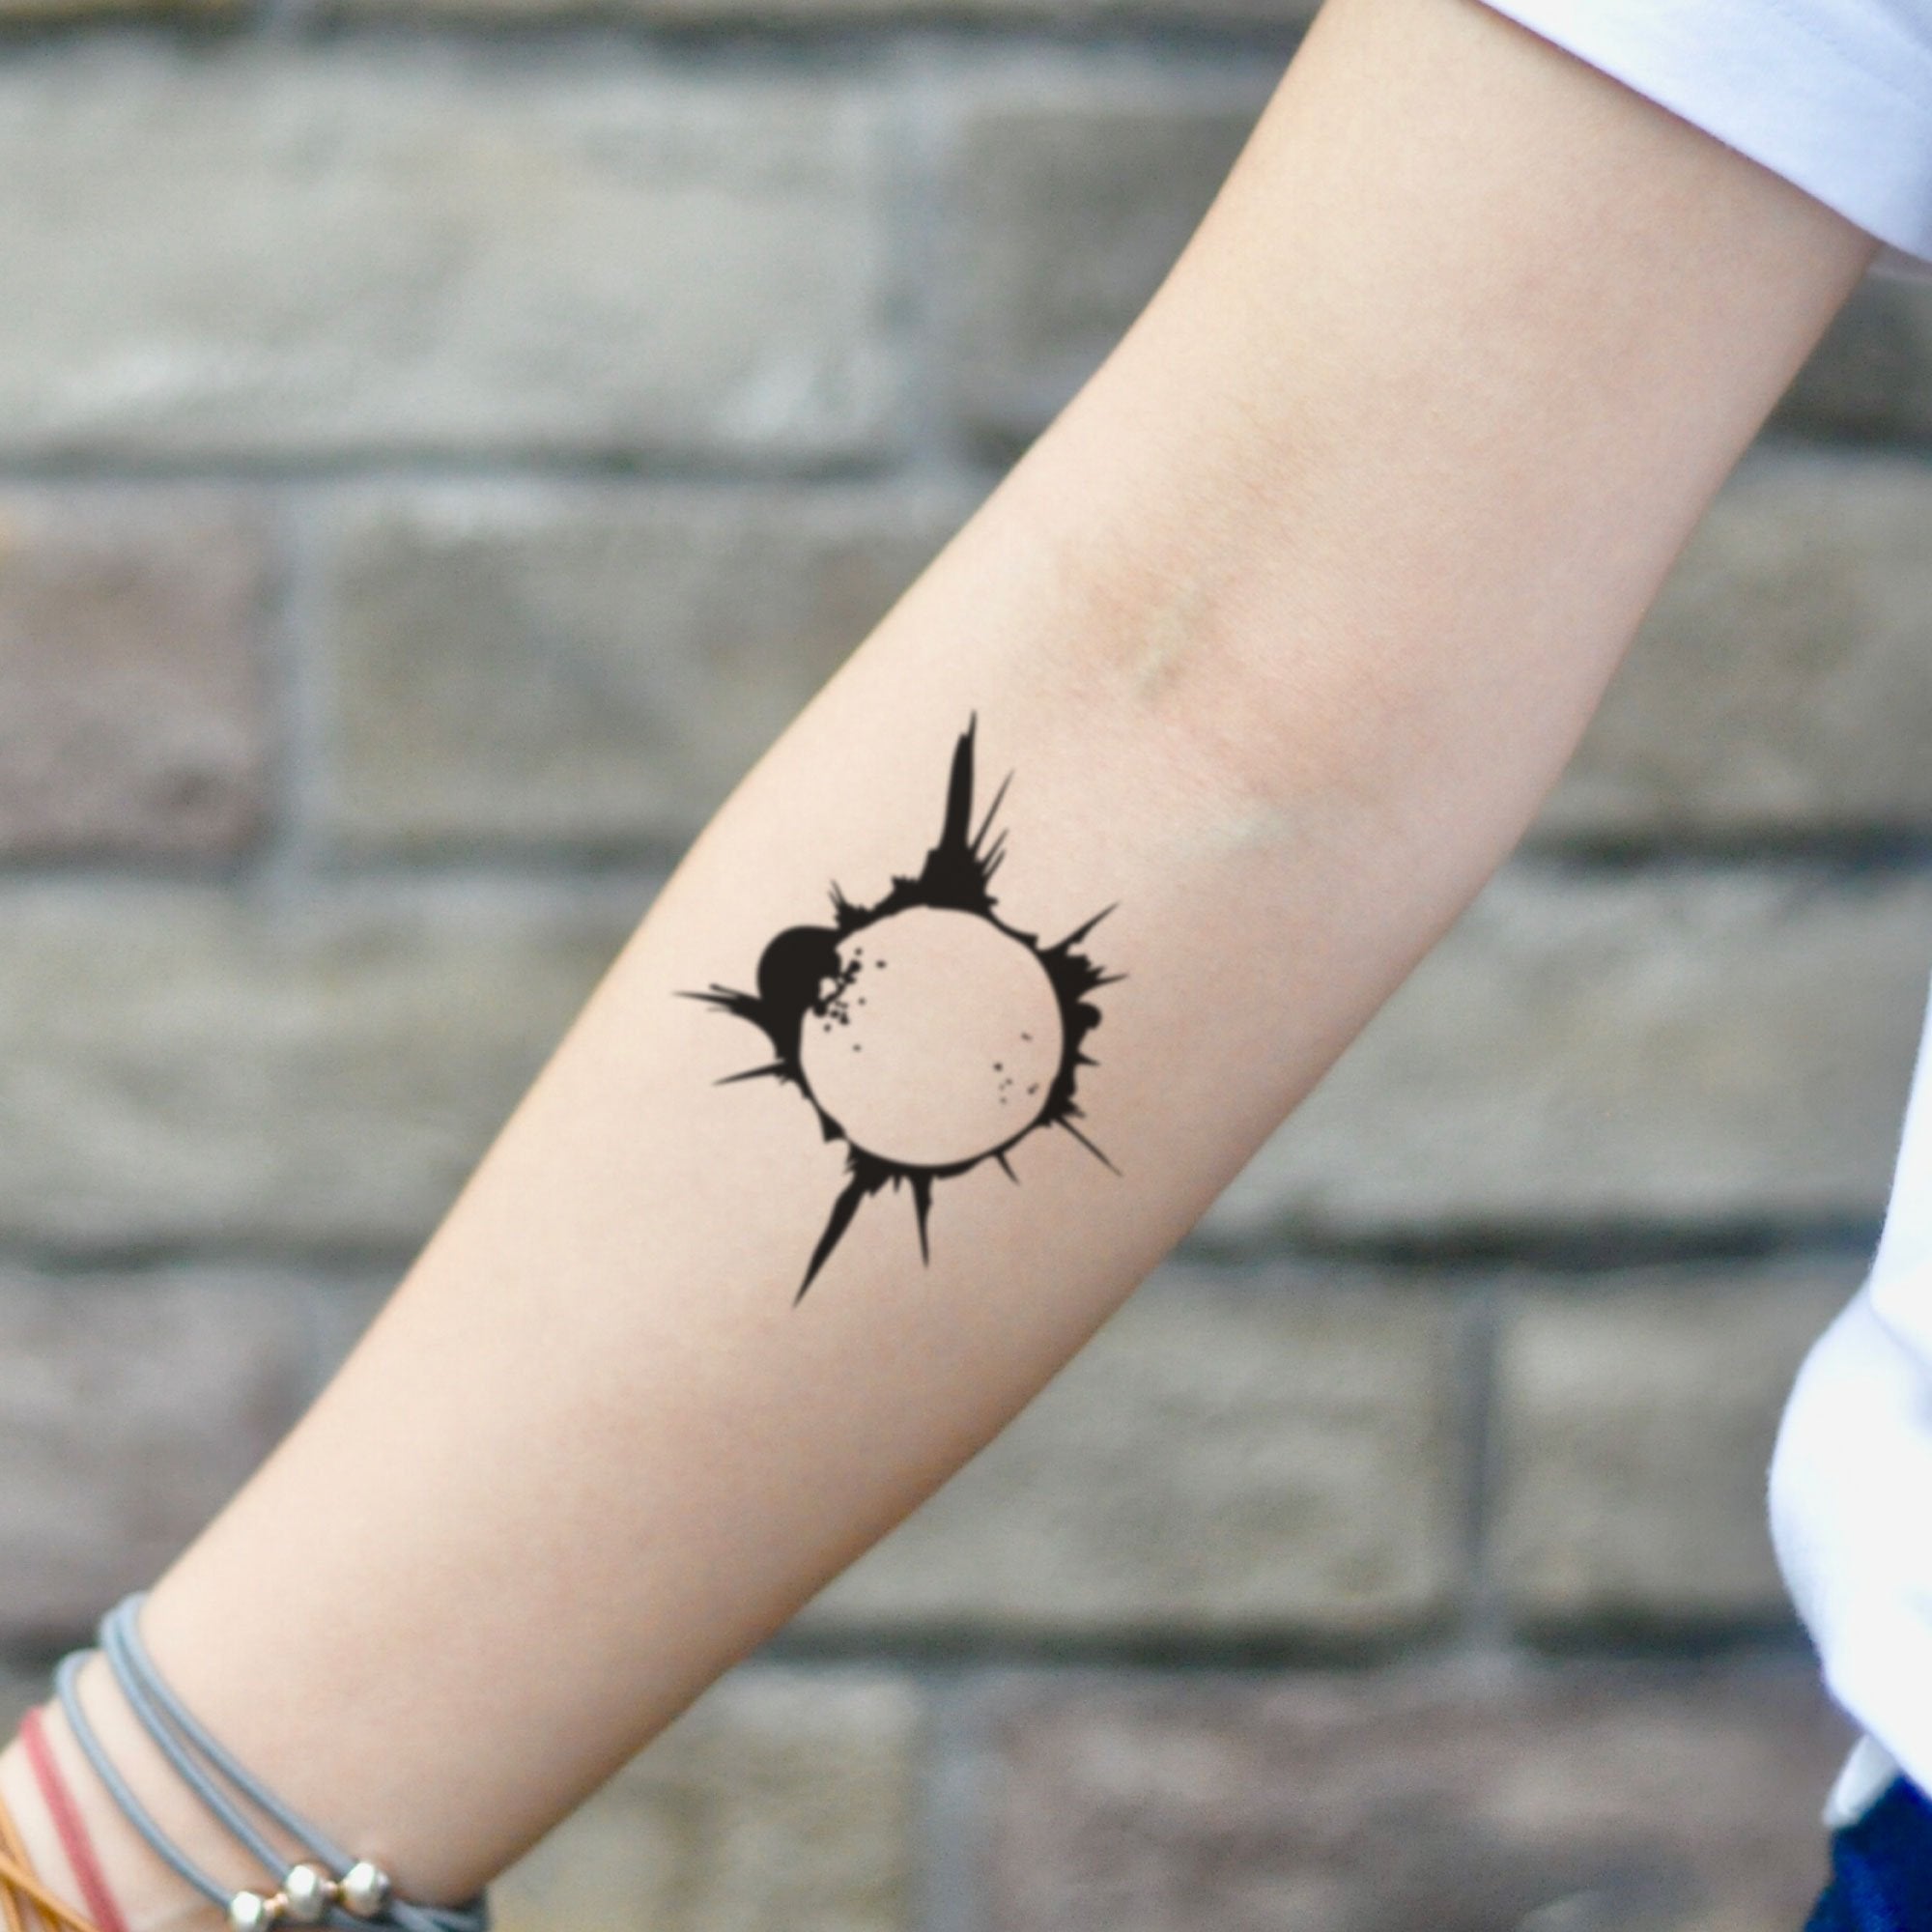 a small black tattoo based on the universe on the arm, | Stable Diffusion